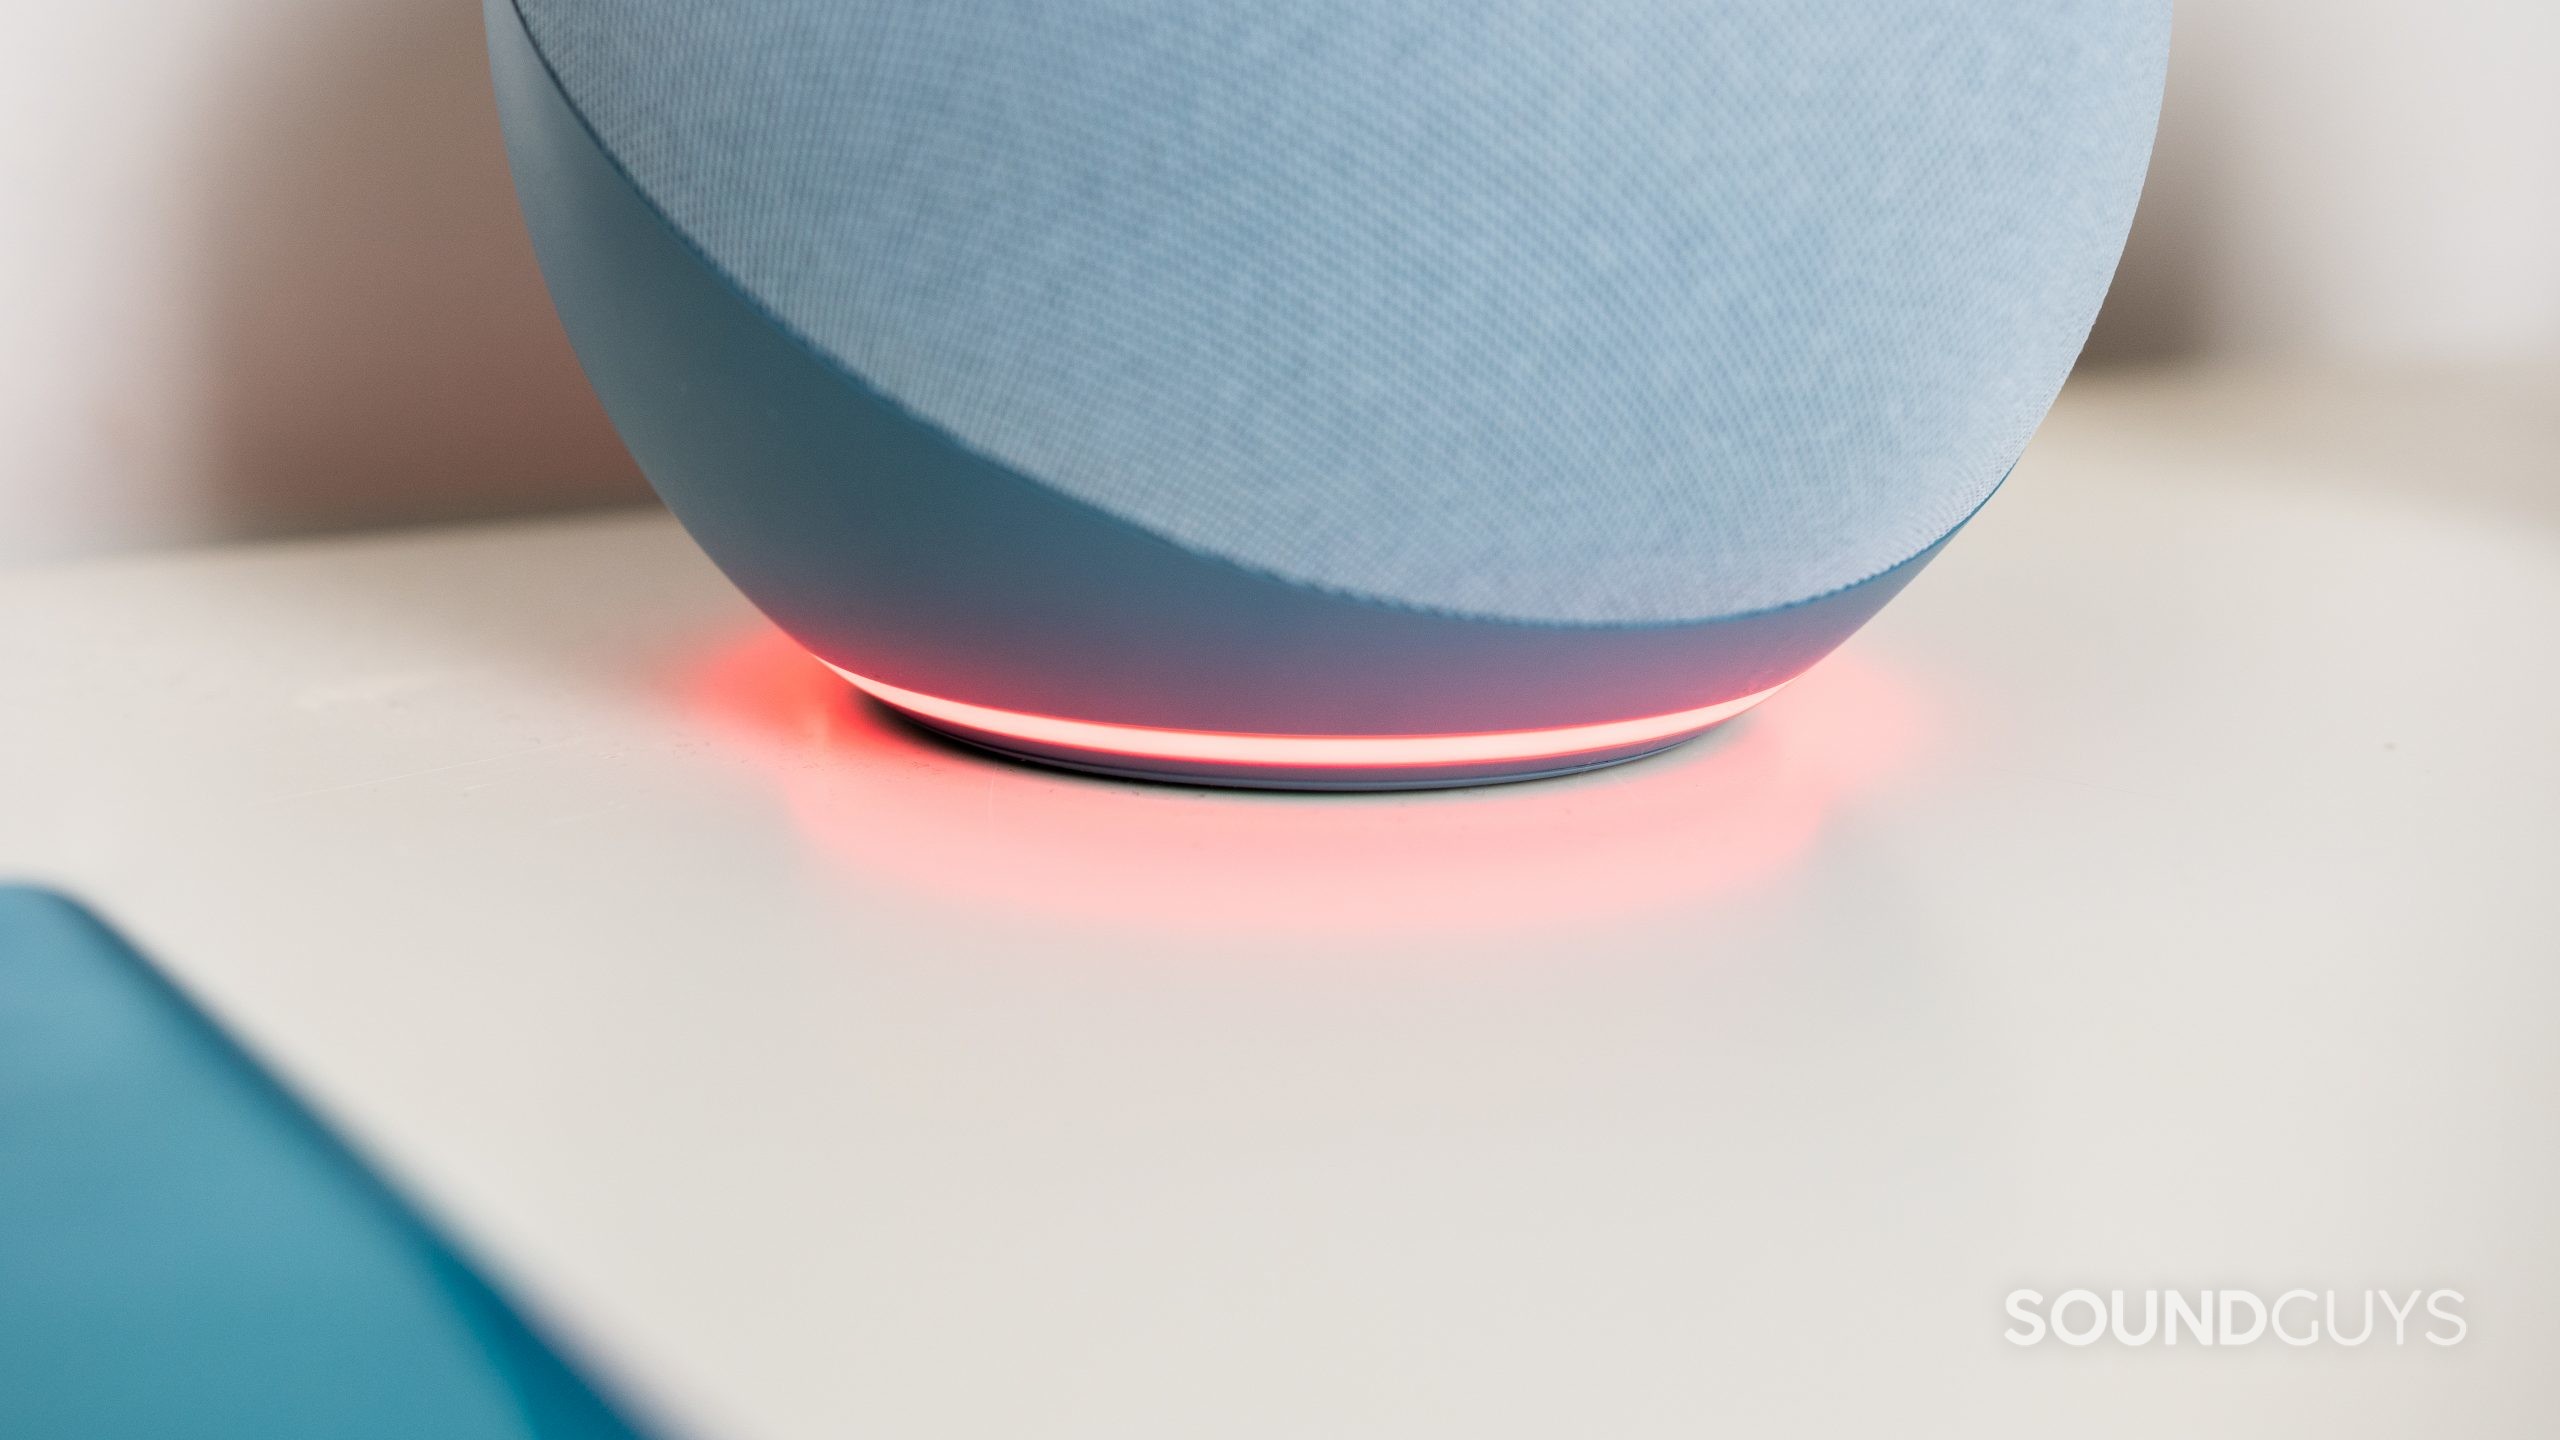 The ring of the Amazon Echo 4th gen glowing red on a white table.